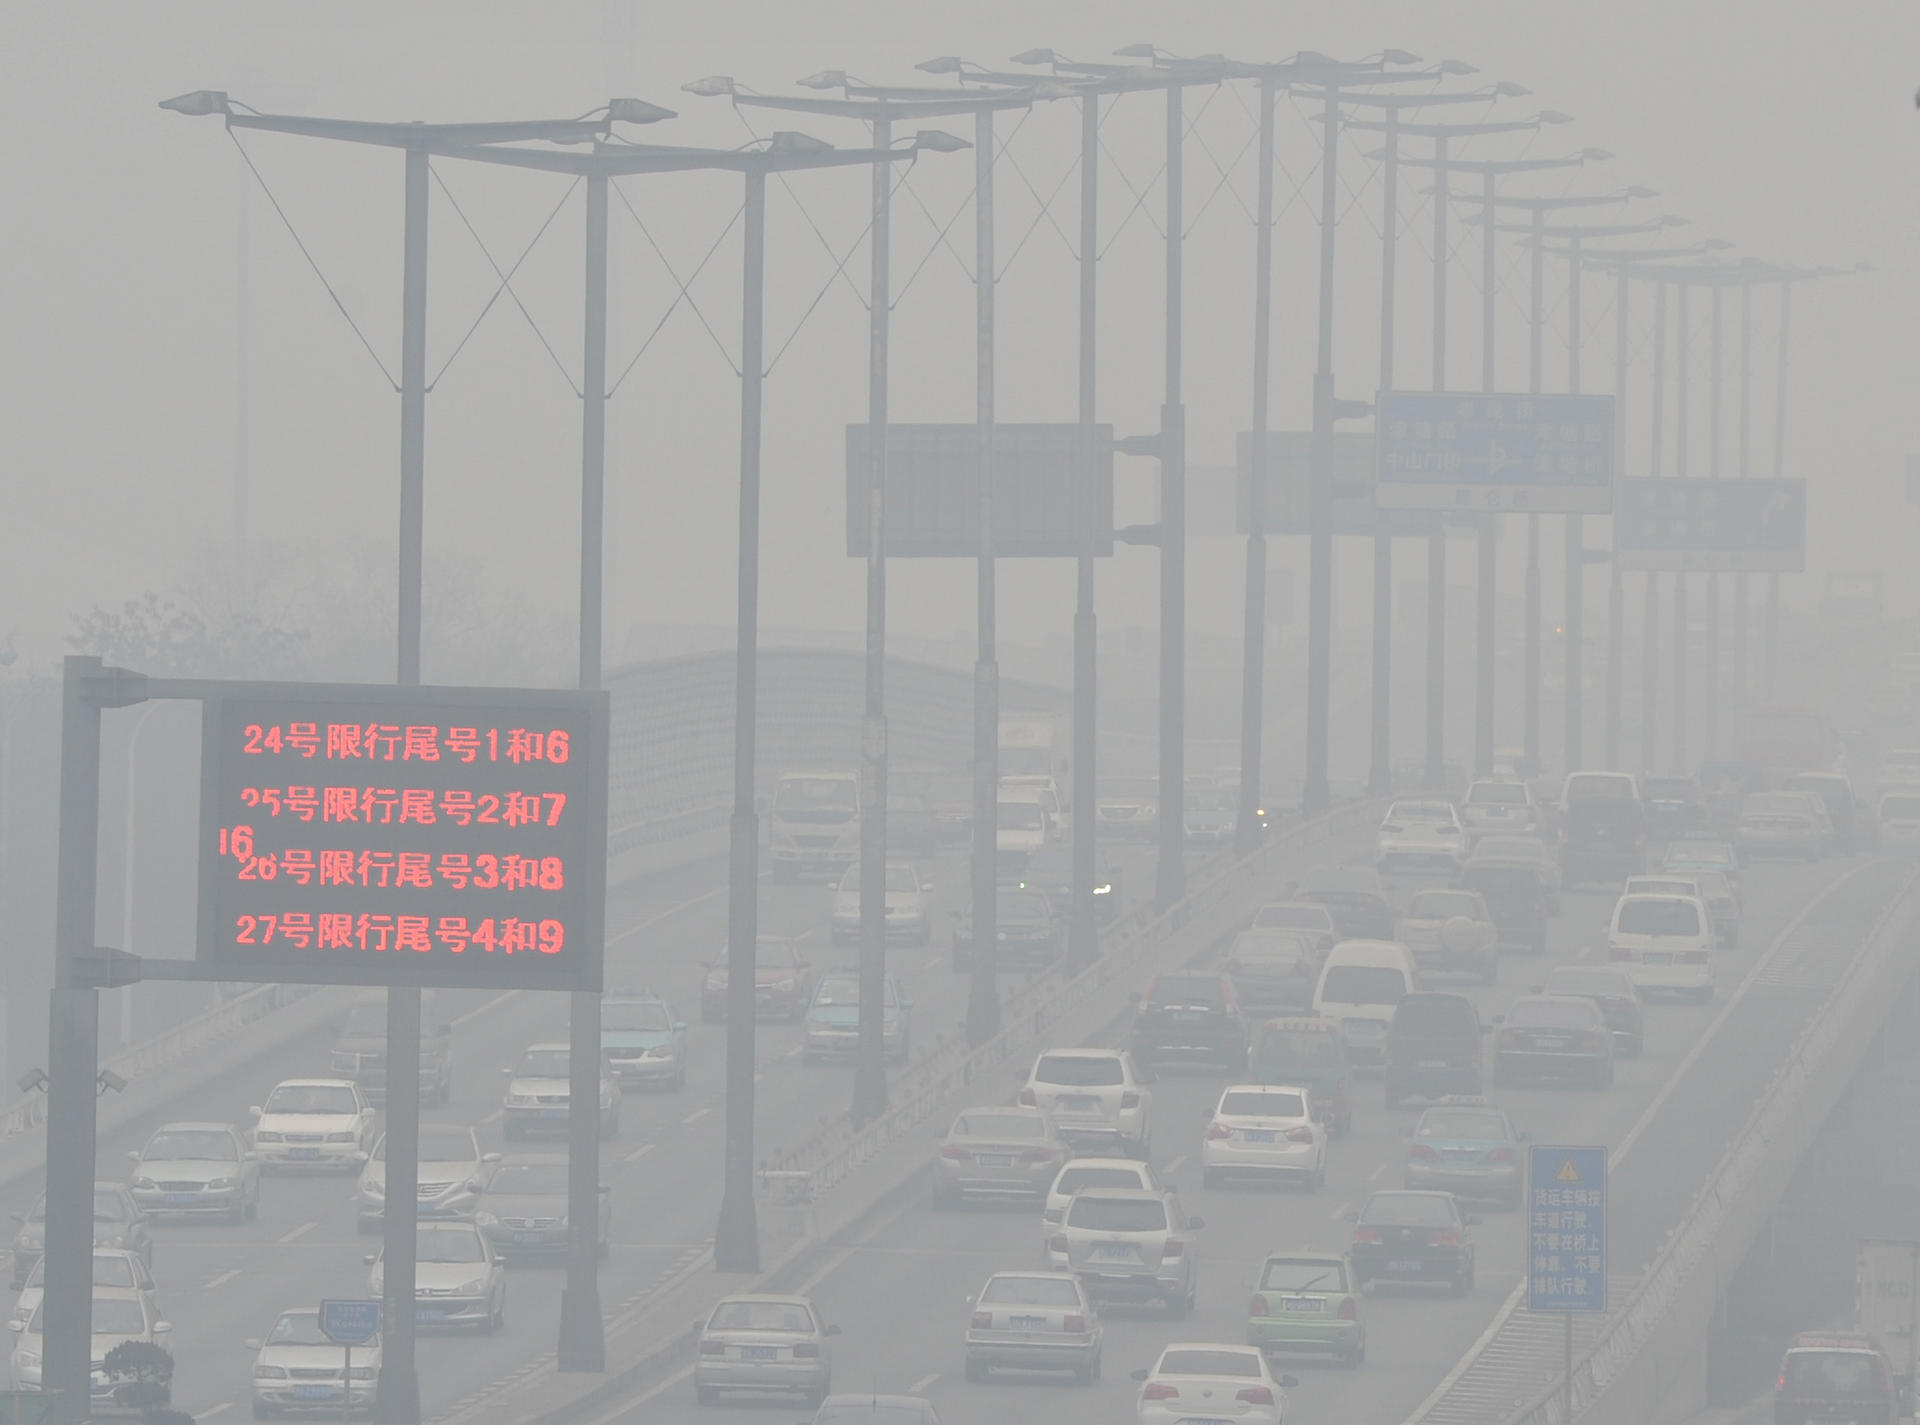 Vehicles are among the biggest contributors to air pollution in Tianjin. Photo: Xinhua